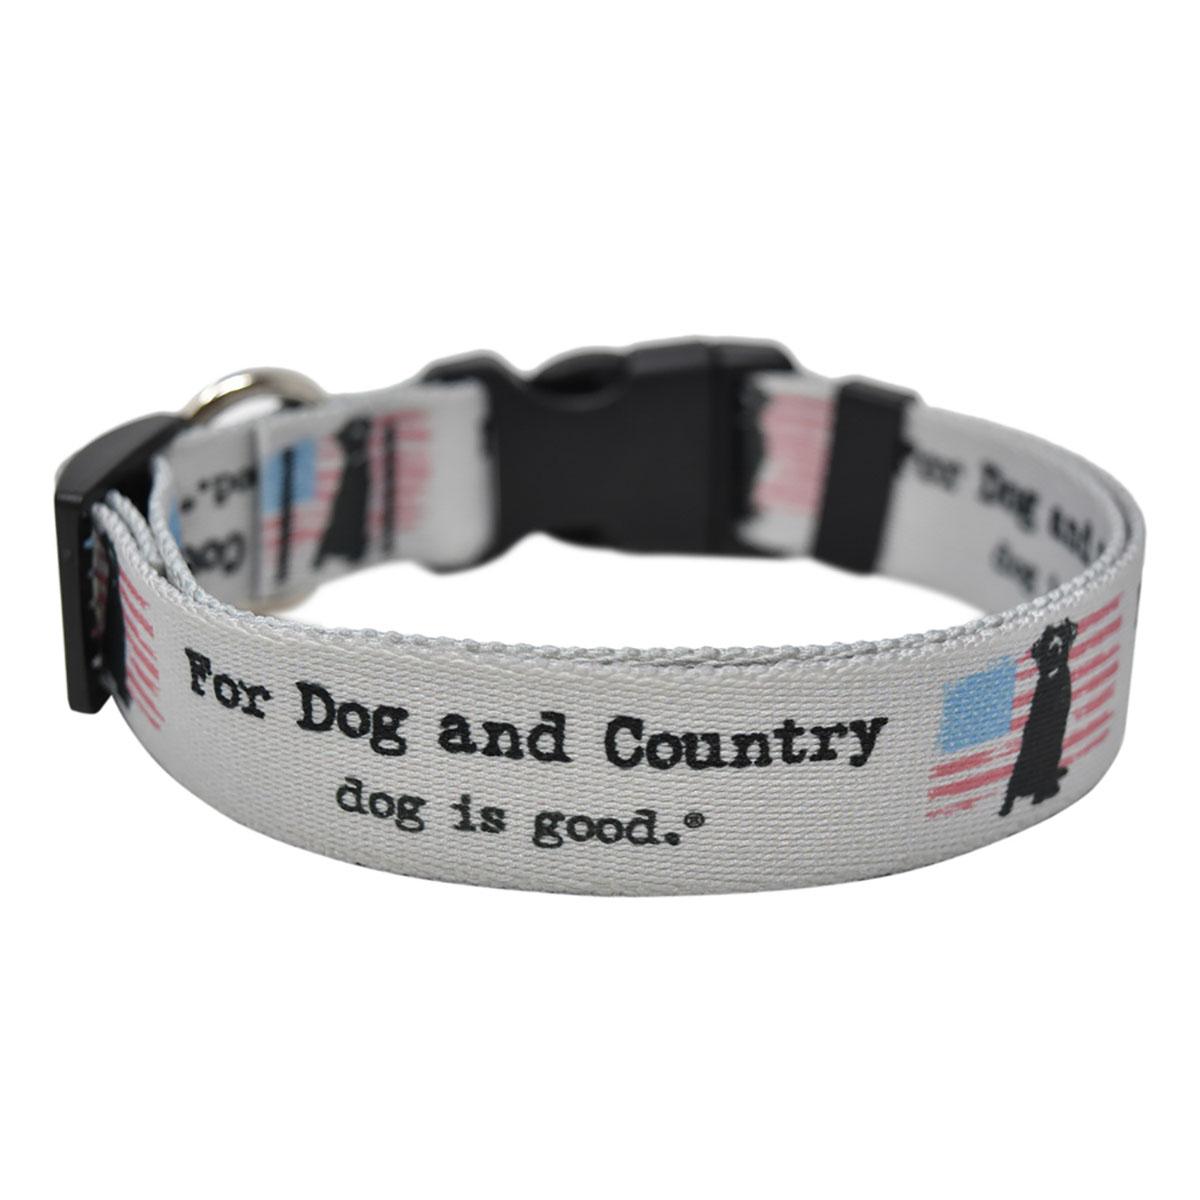 Dog is Good For Dog and Country Dog Collar and Leash Collection - Gray